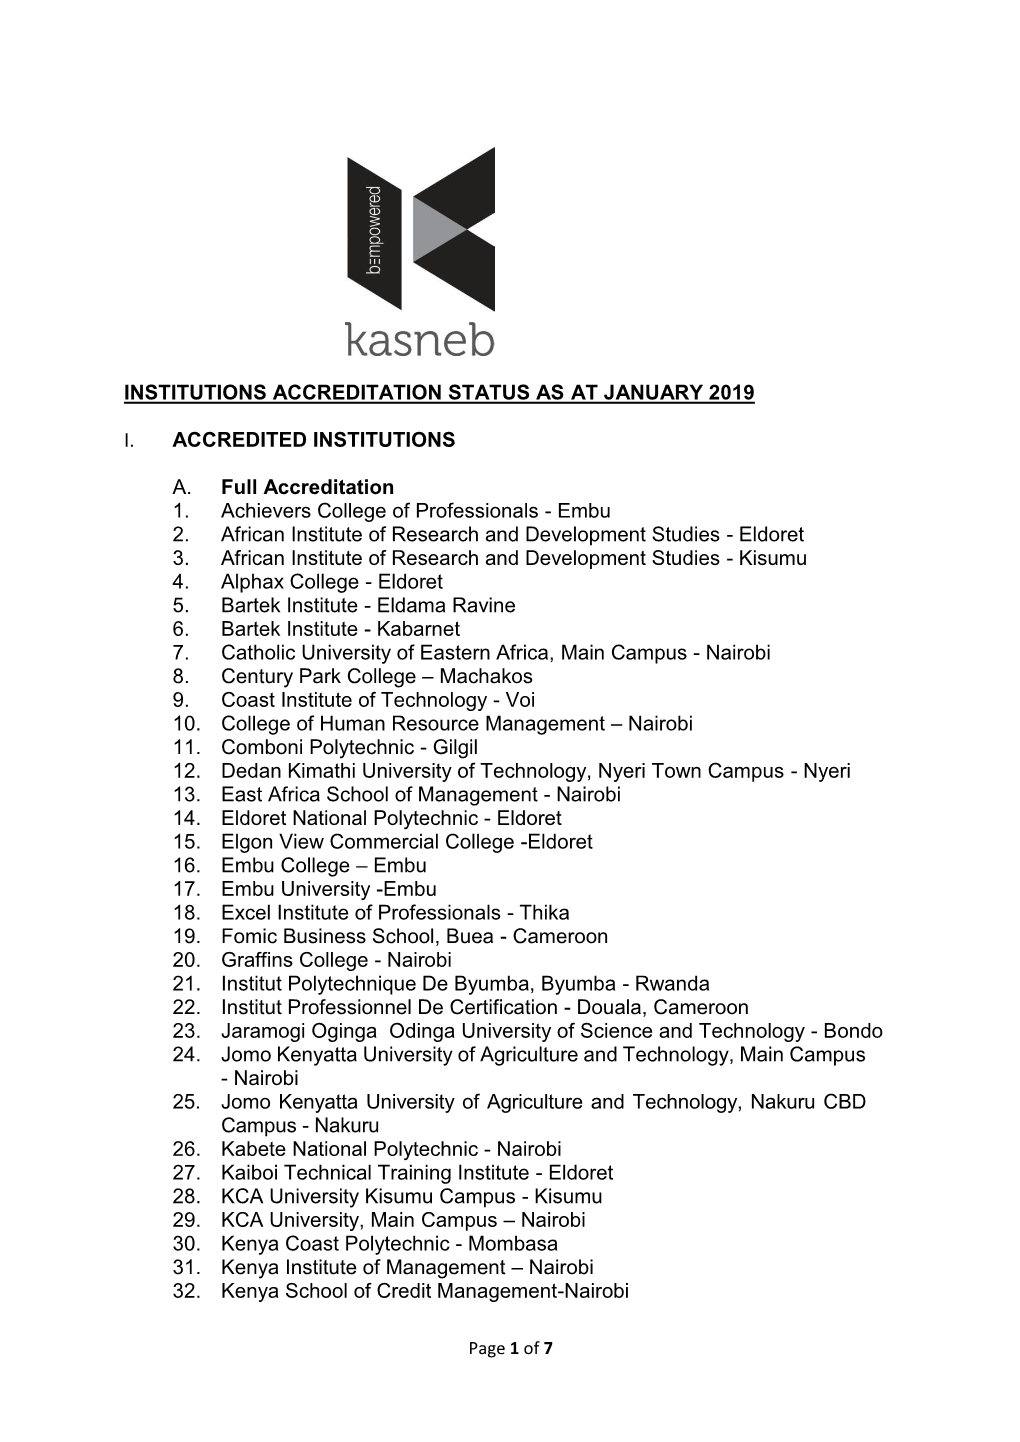 Institutions Accreditation Status As at January 2019